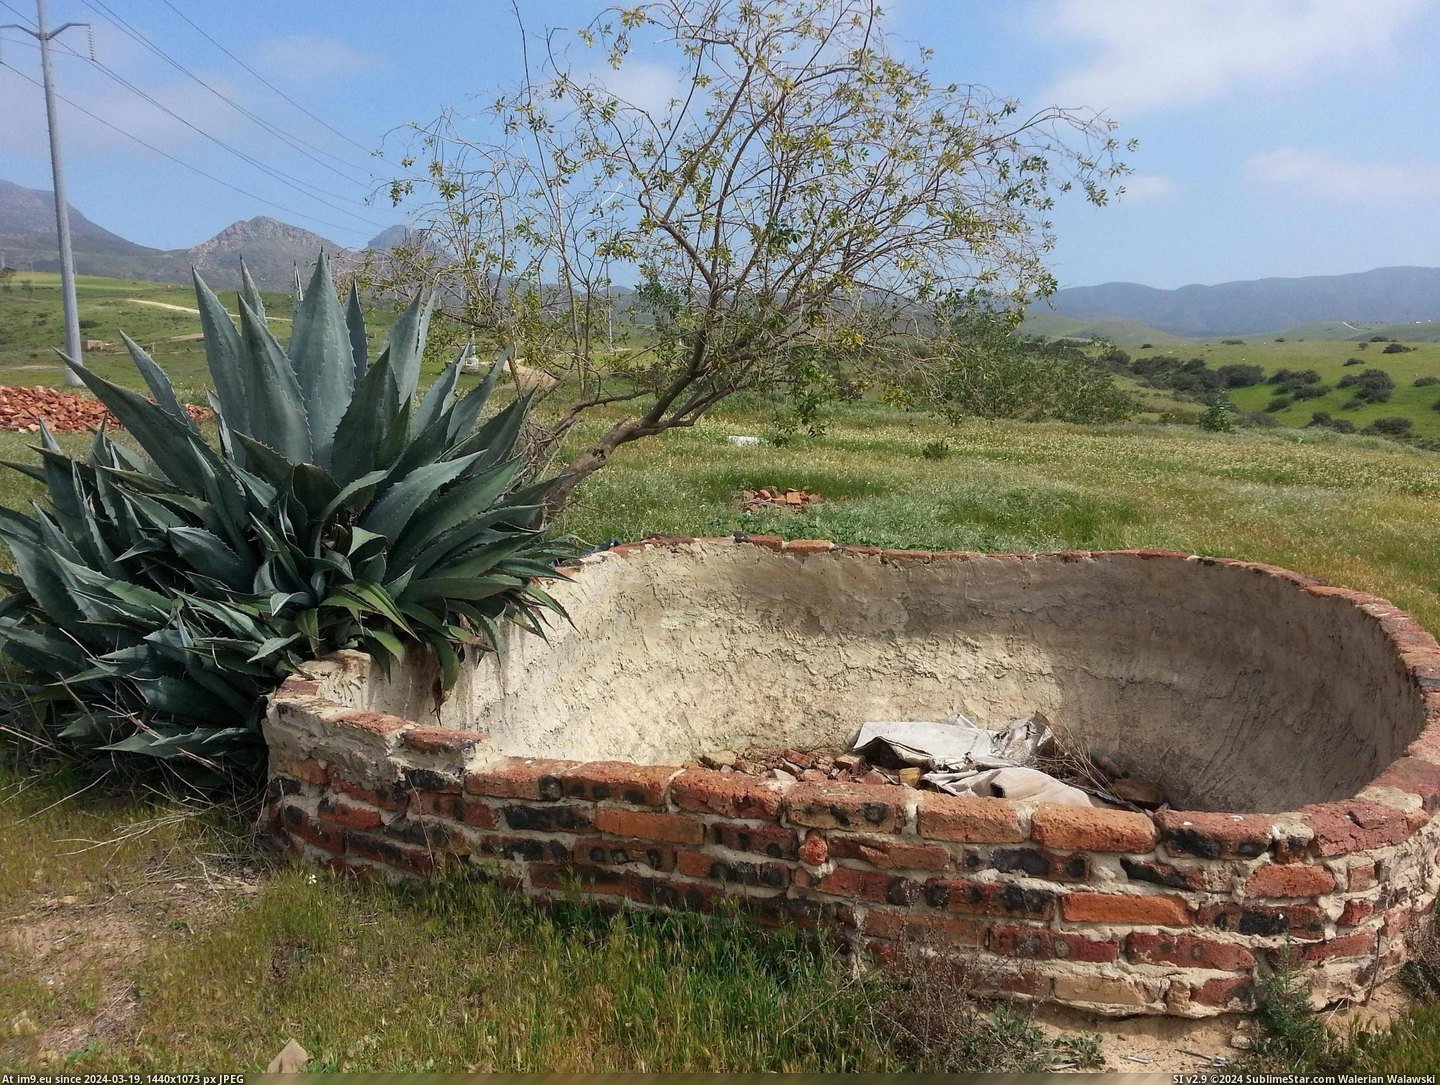 #Old #Brick #Resemble #Structure #Cactus #Pineapple [Mildlyinteresting] Together this old brick structure and cactus resemble a pineapple Pic. (Bild von album My r/MILDLYINTERESTING favs))